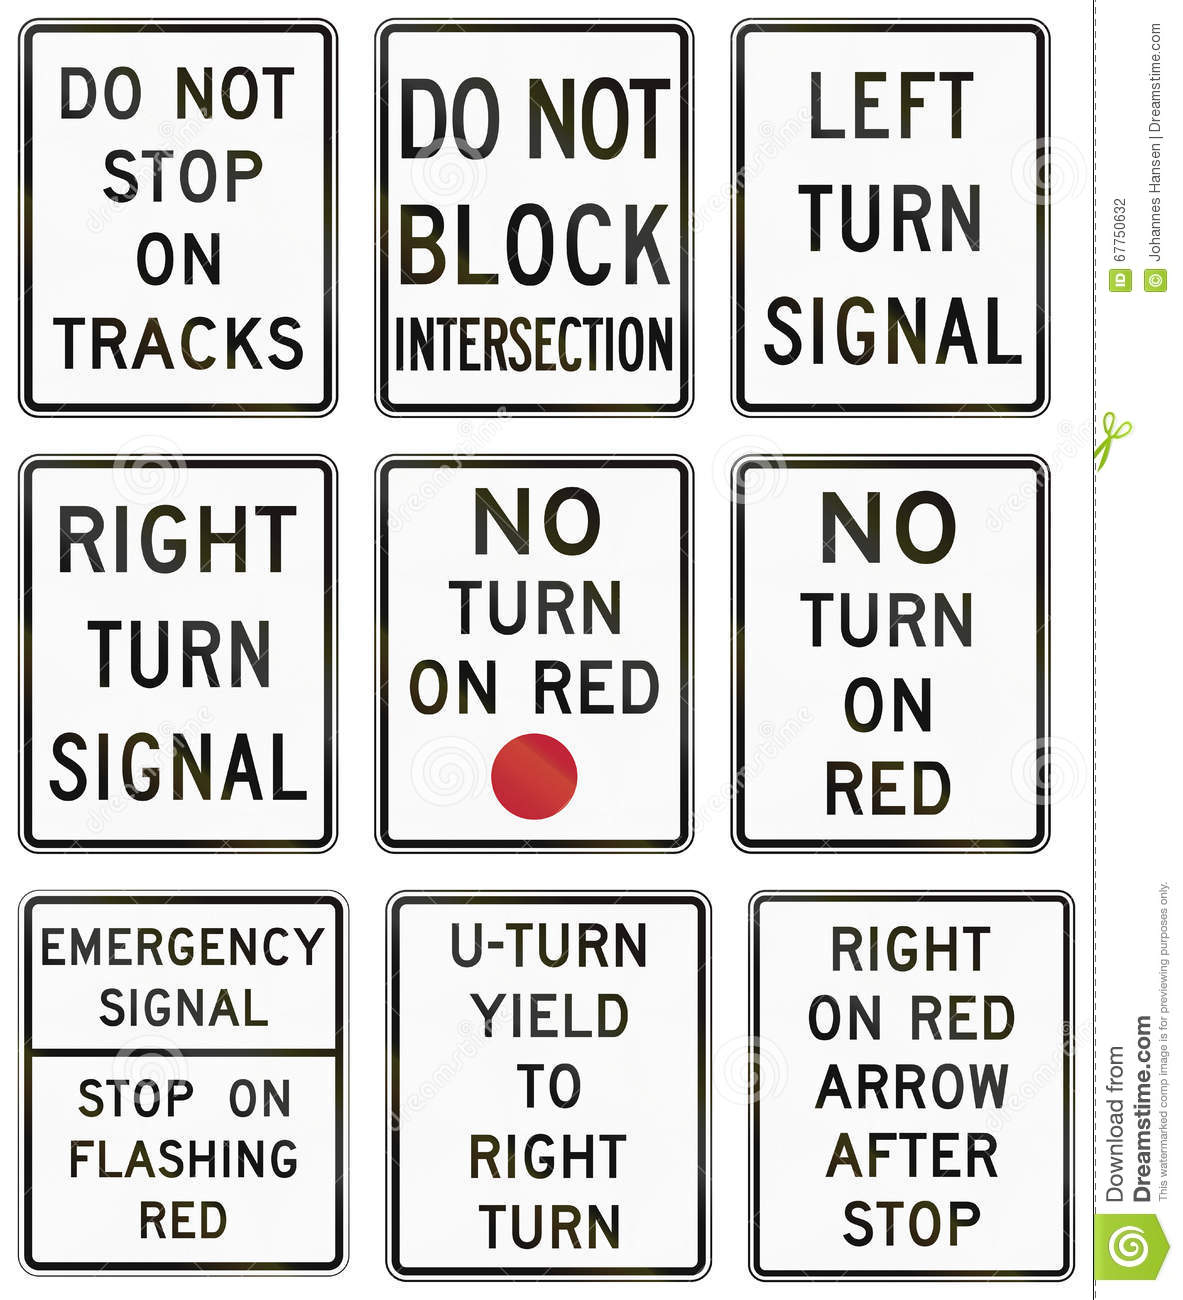 Mutcd Signs In Autocad - caqwescience